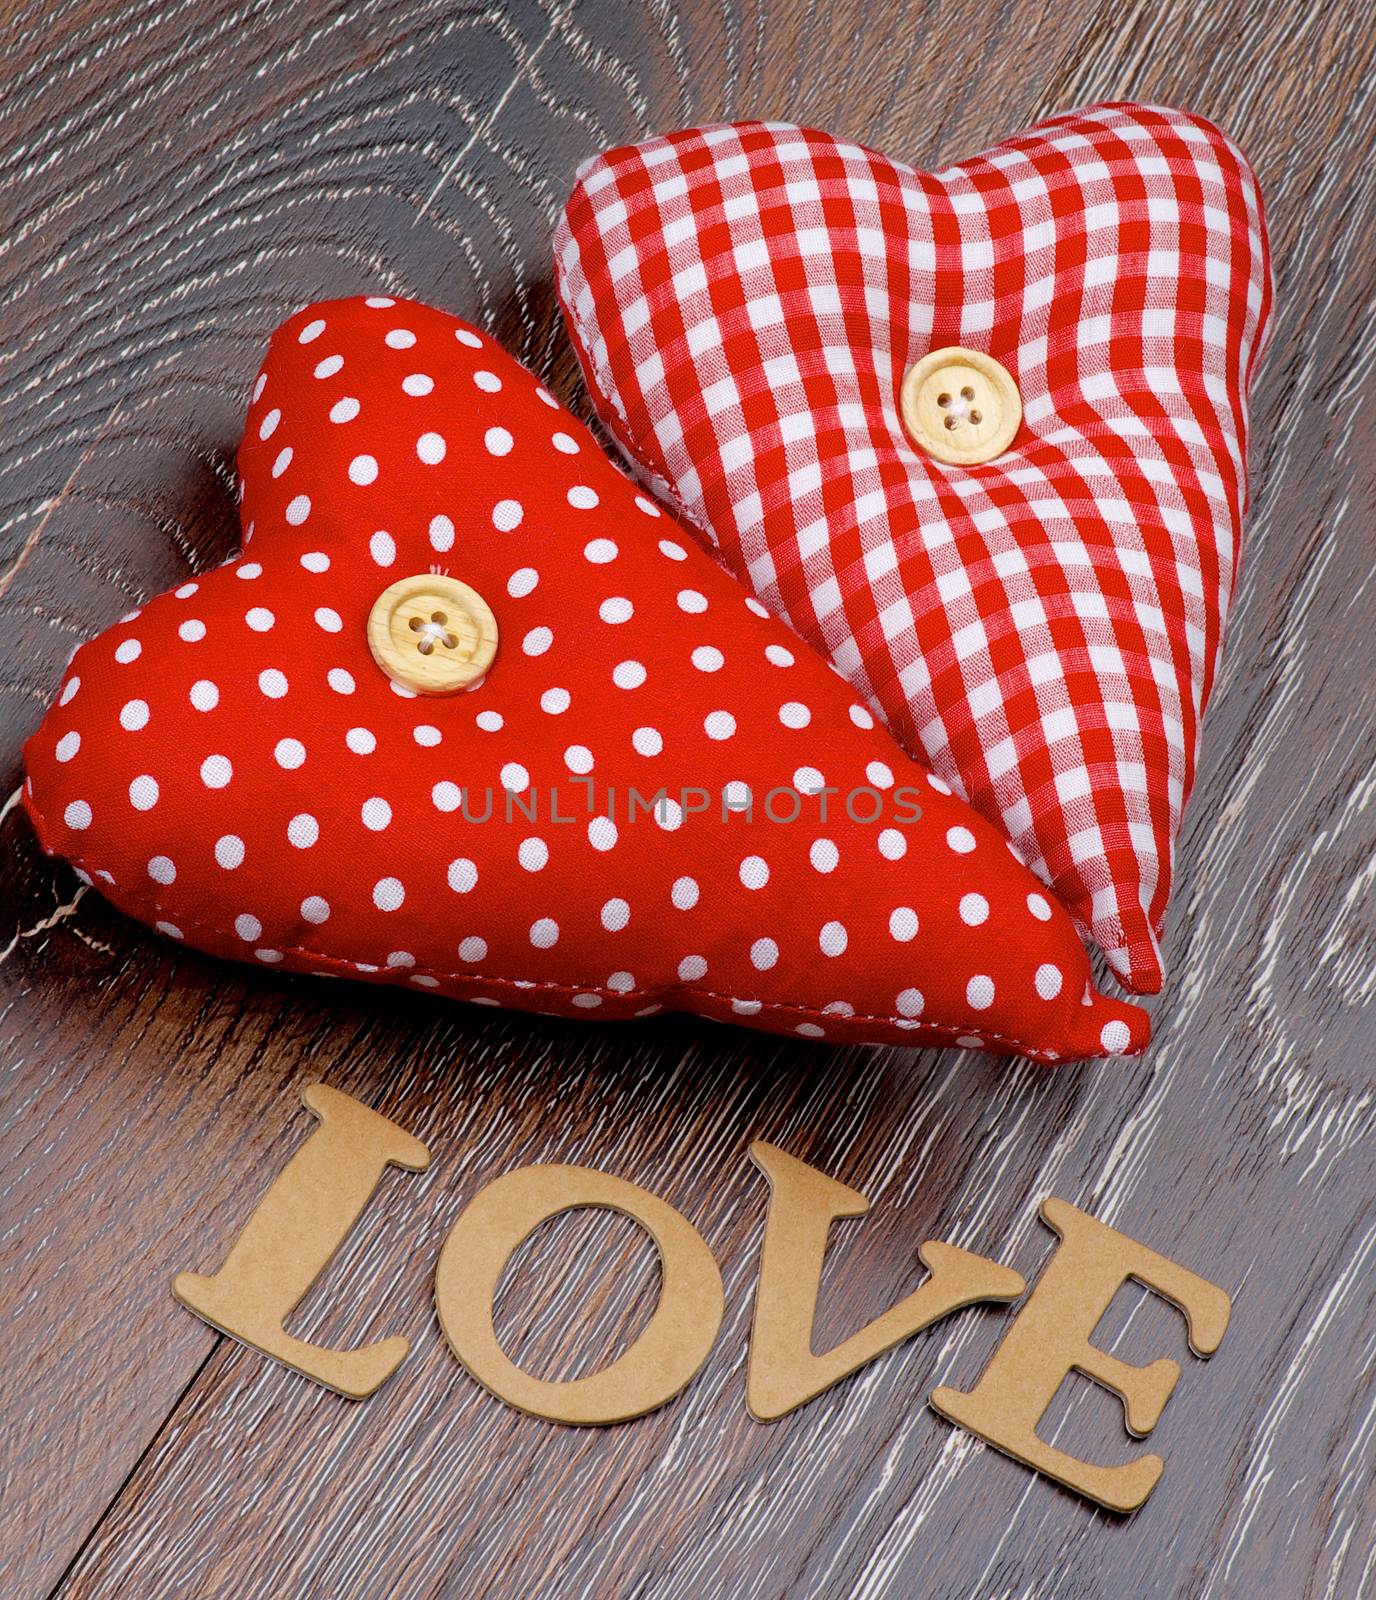 Cardboard Word Love and Two Handmade Textile Red Polka Dot Hearts closeup on Hardwood background